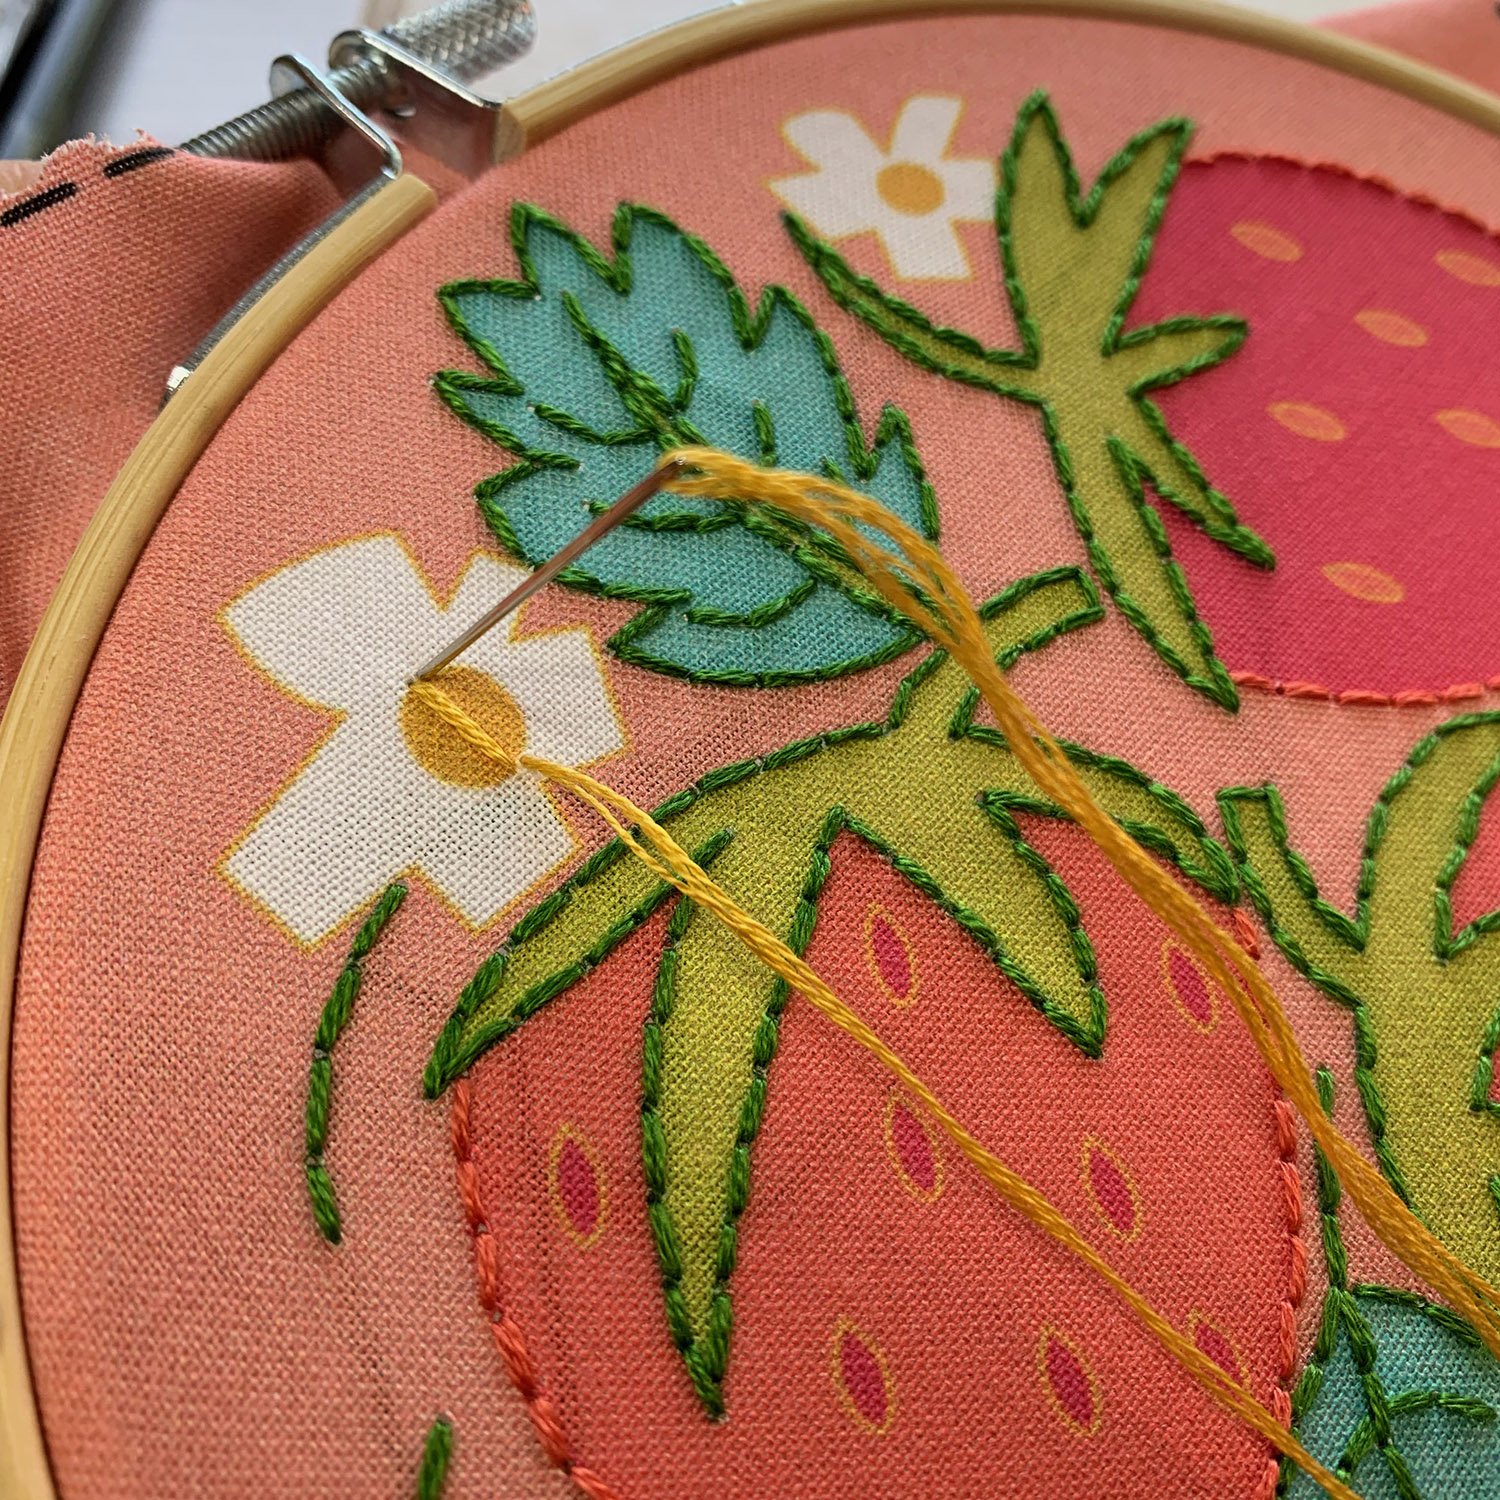 Strawberry embroidery detail 2.jpg